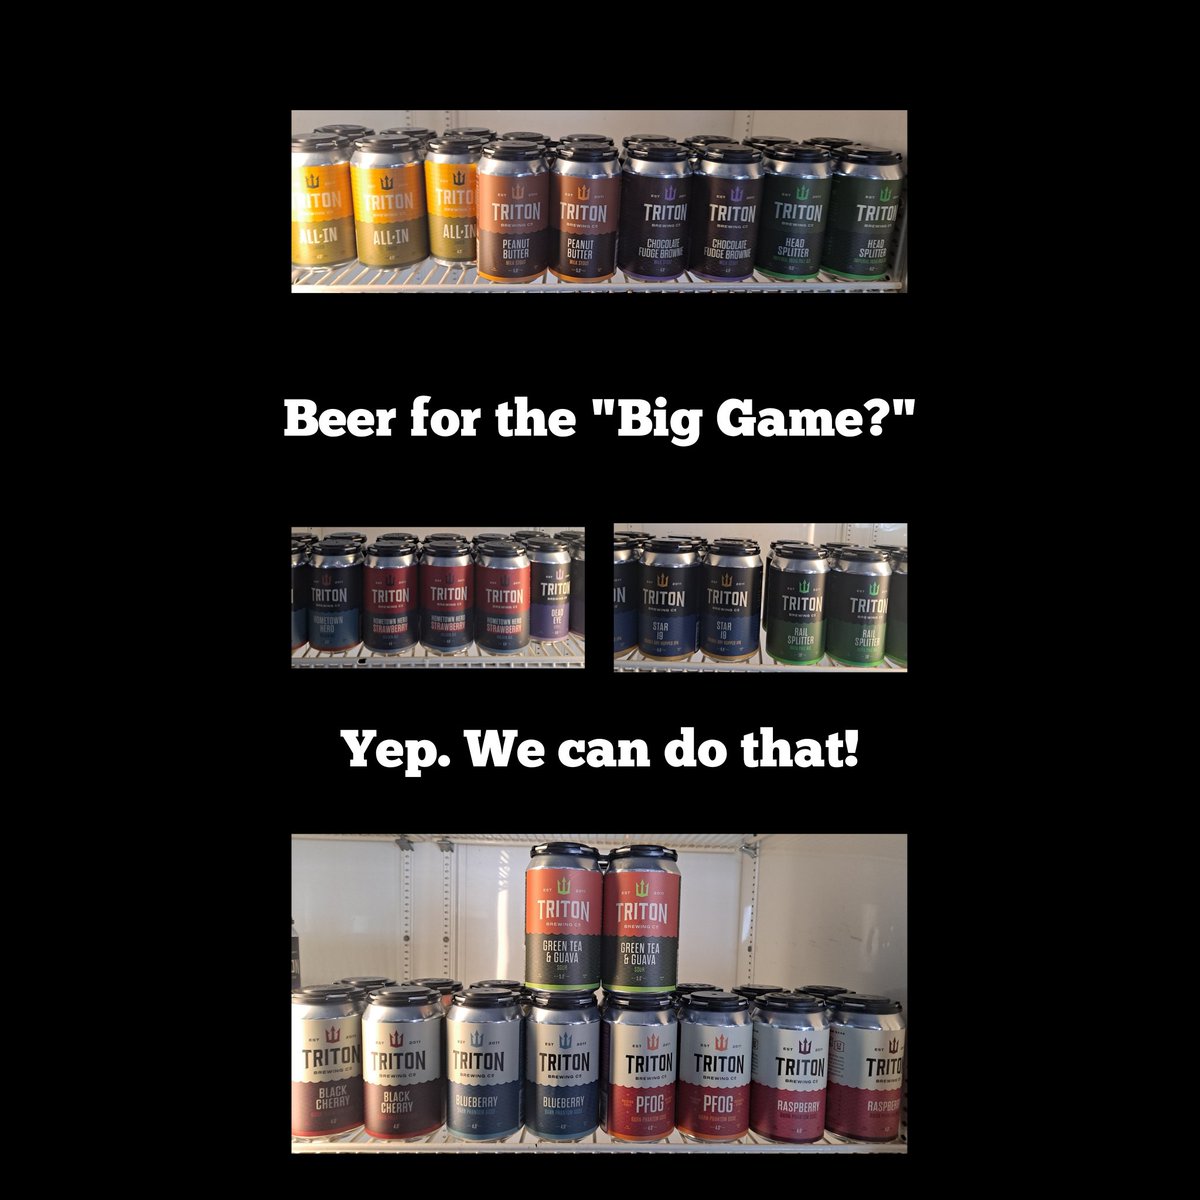 Beer for the 'Big Game?' 14 canned options plus a few others in #growlers. We #CAN help! 🍻🏈

#BrewedOnBase #Indianapolis #FtBenIN #Supporttheforthefort #WhyILoveLawrence #IndianaGrown #IndianaBrewed #IndianaBeer #indianacraftbeer #independentcraftbeer